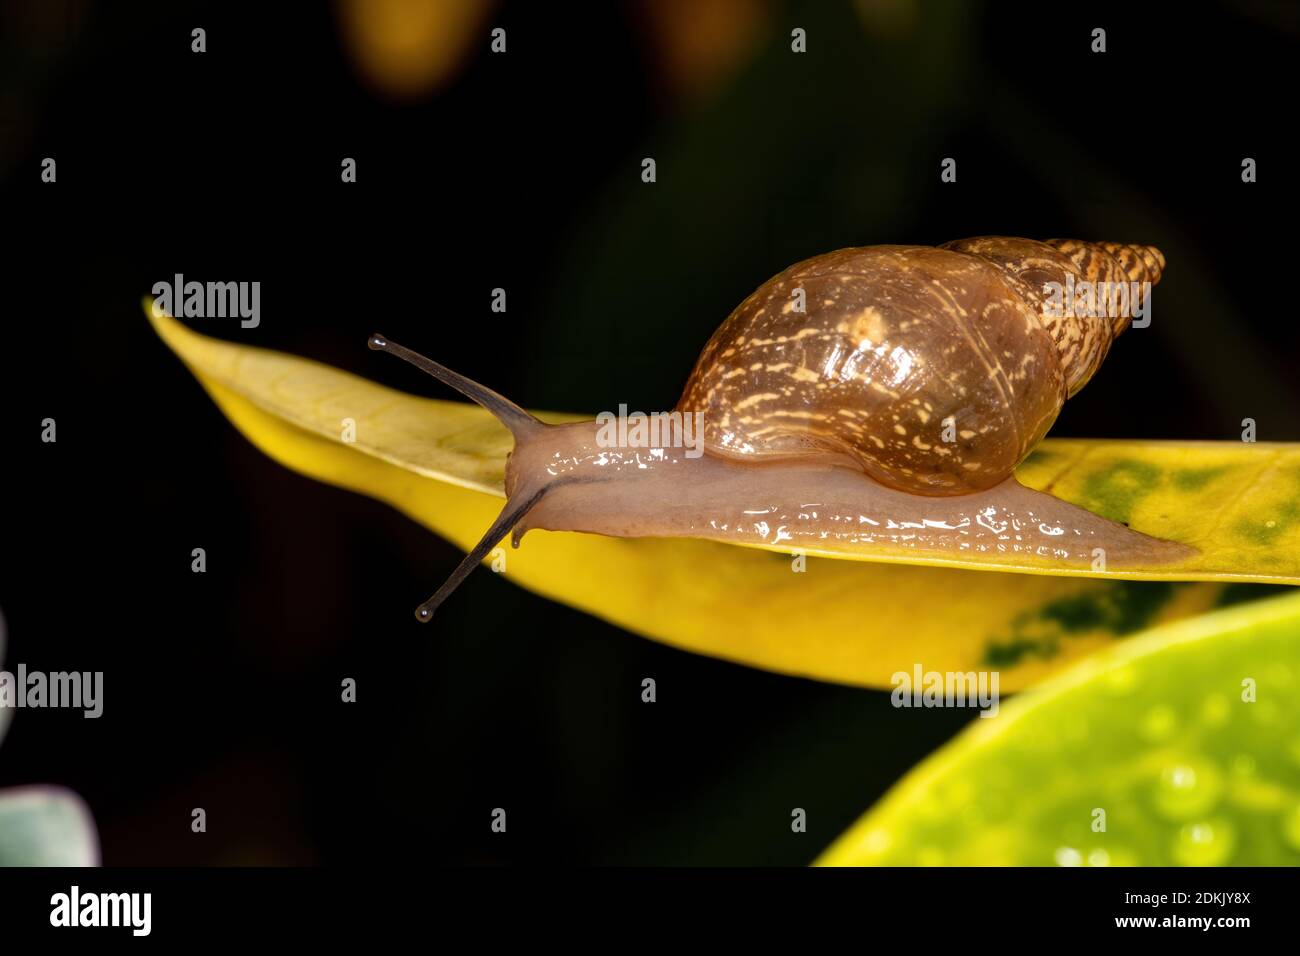 Helicinan Snail of the Genus Bulimulus Stock Photo